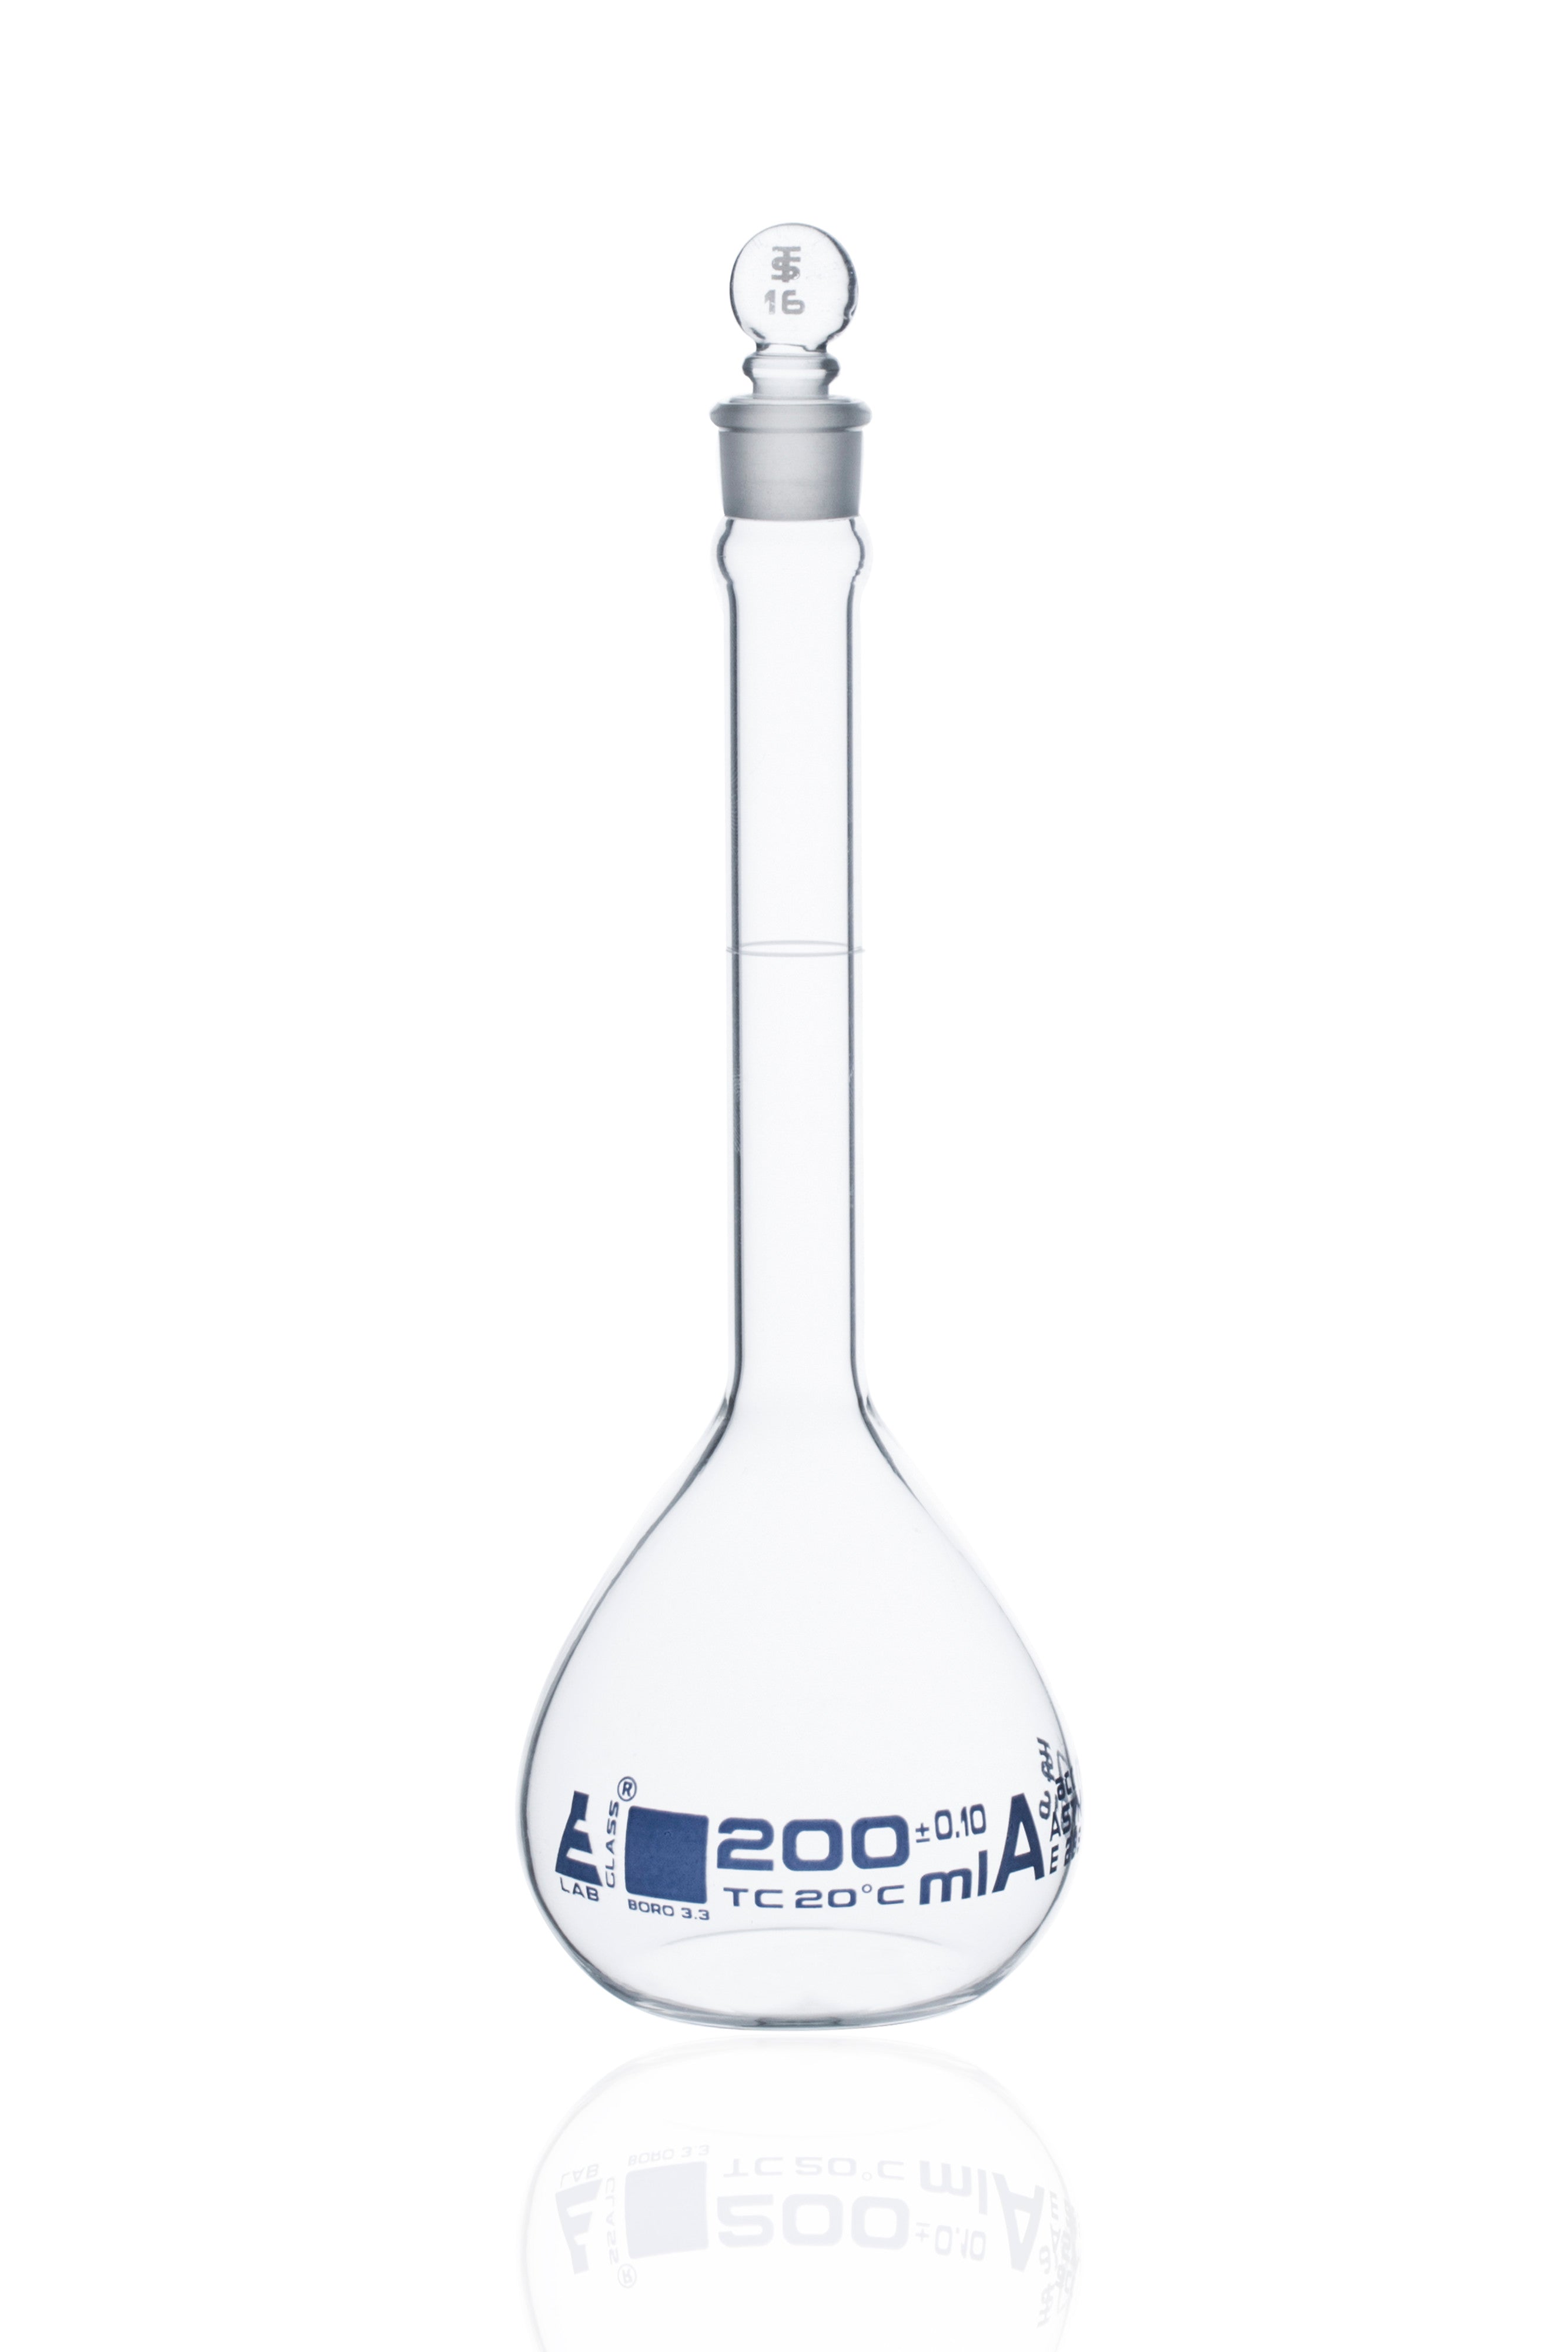 Borosilicate Glass ASTM Volumetric Flask with Glass Stopper, 200 ml, Class A, Autoclavable